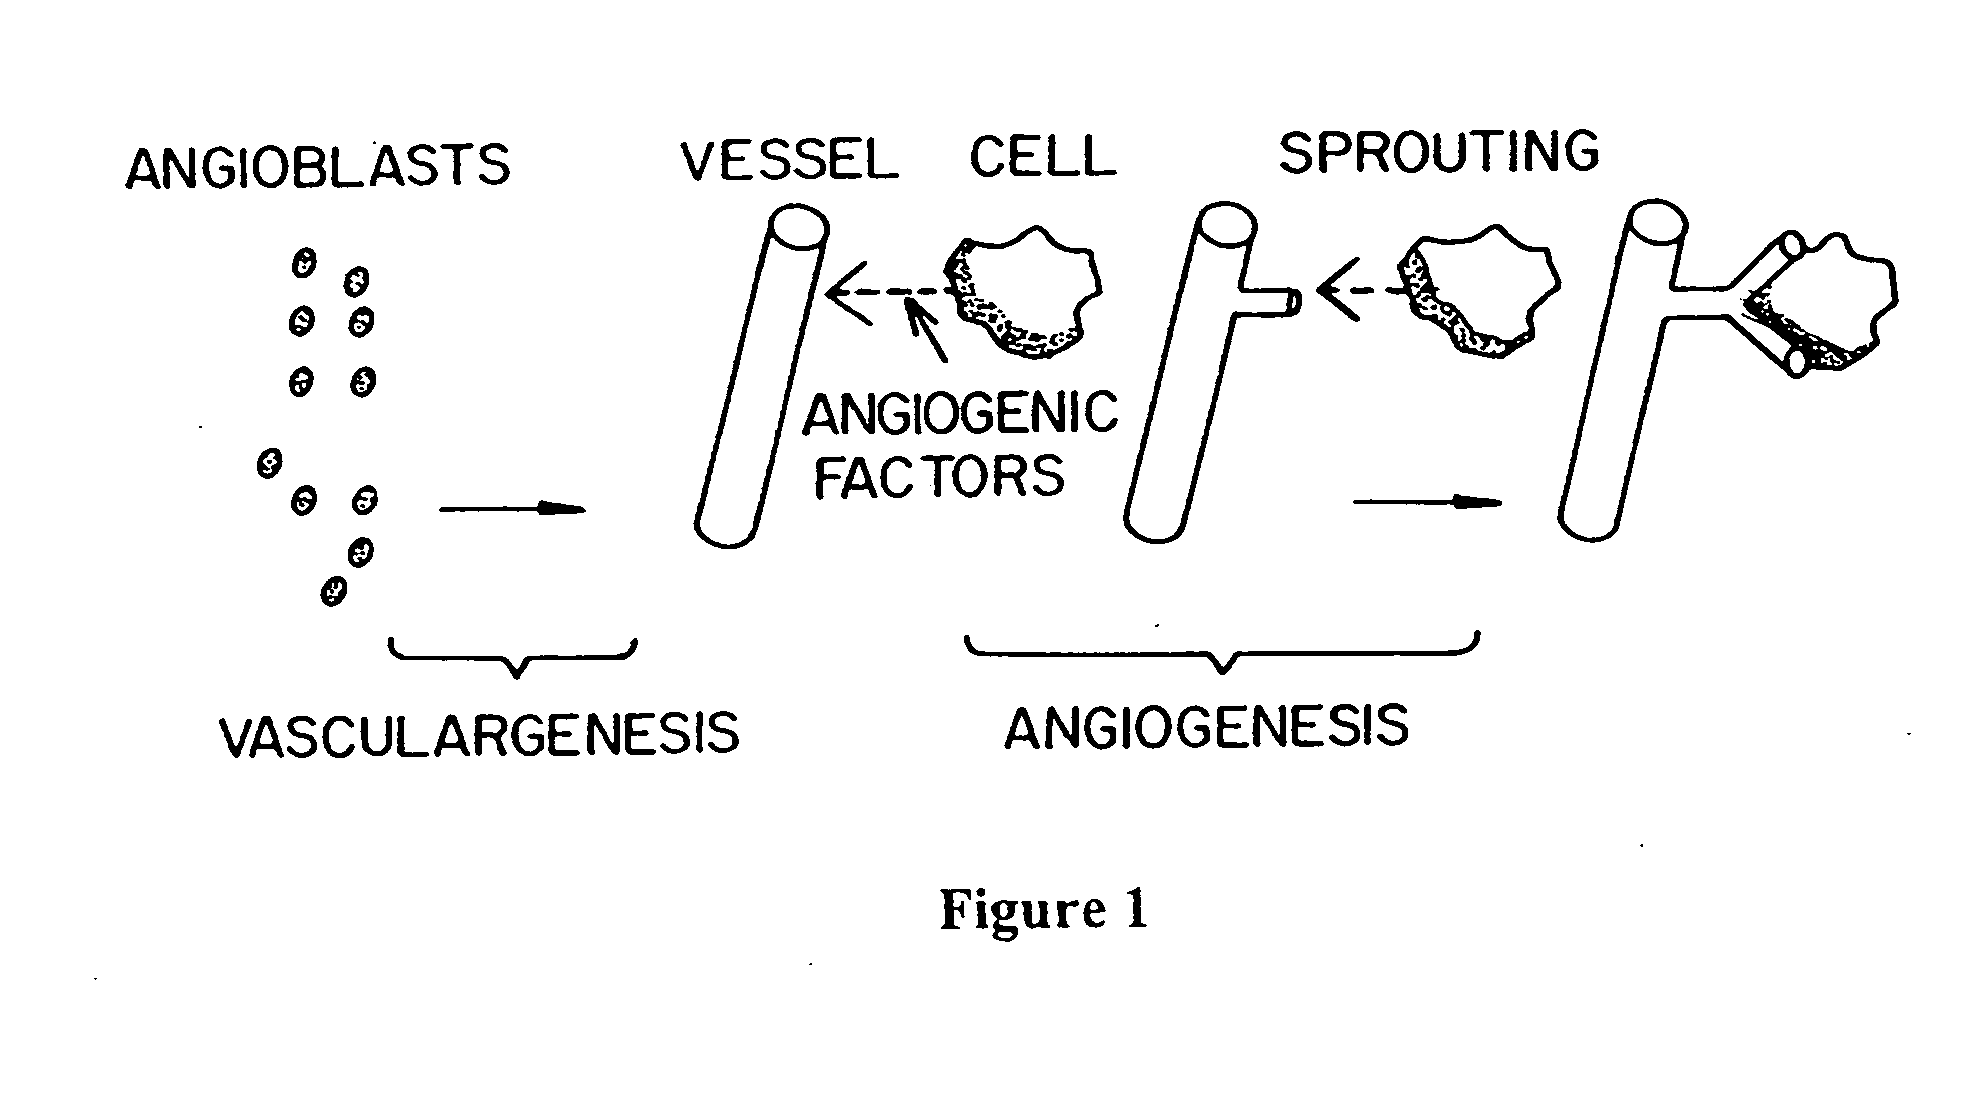 Methods of screening agents for activity using teleosts